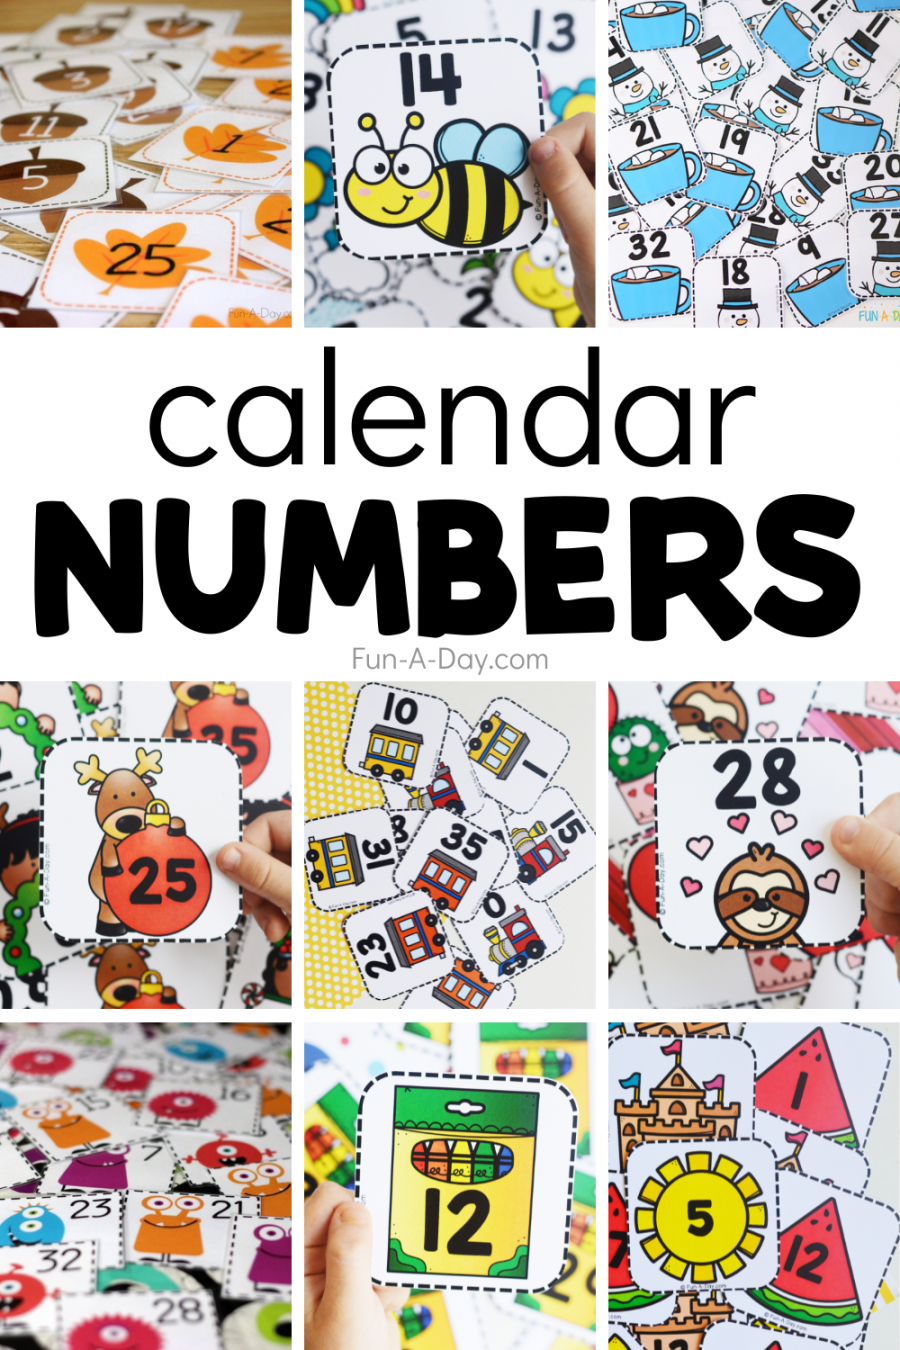 Calendar Numbers for the Whole Year - Fun-A-Day!